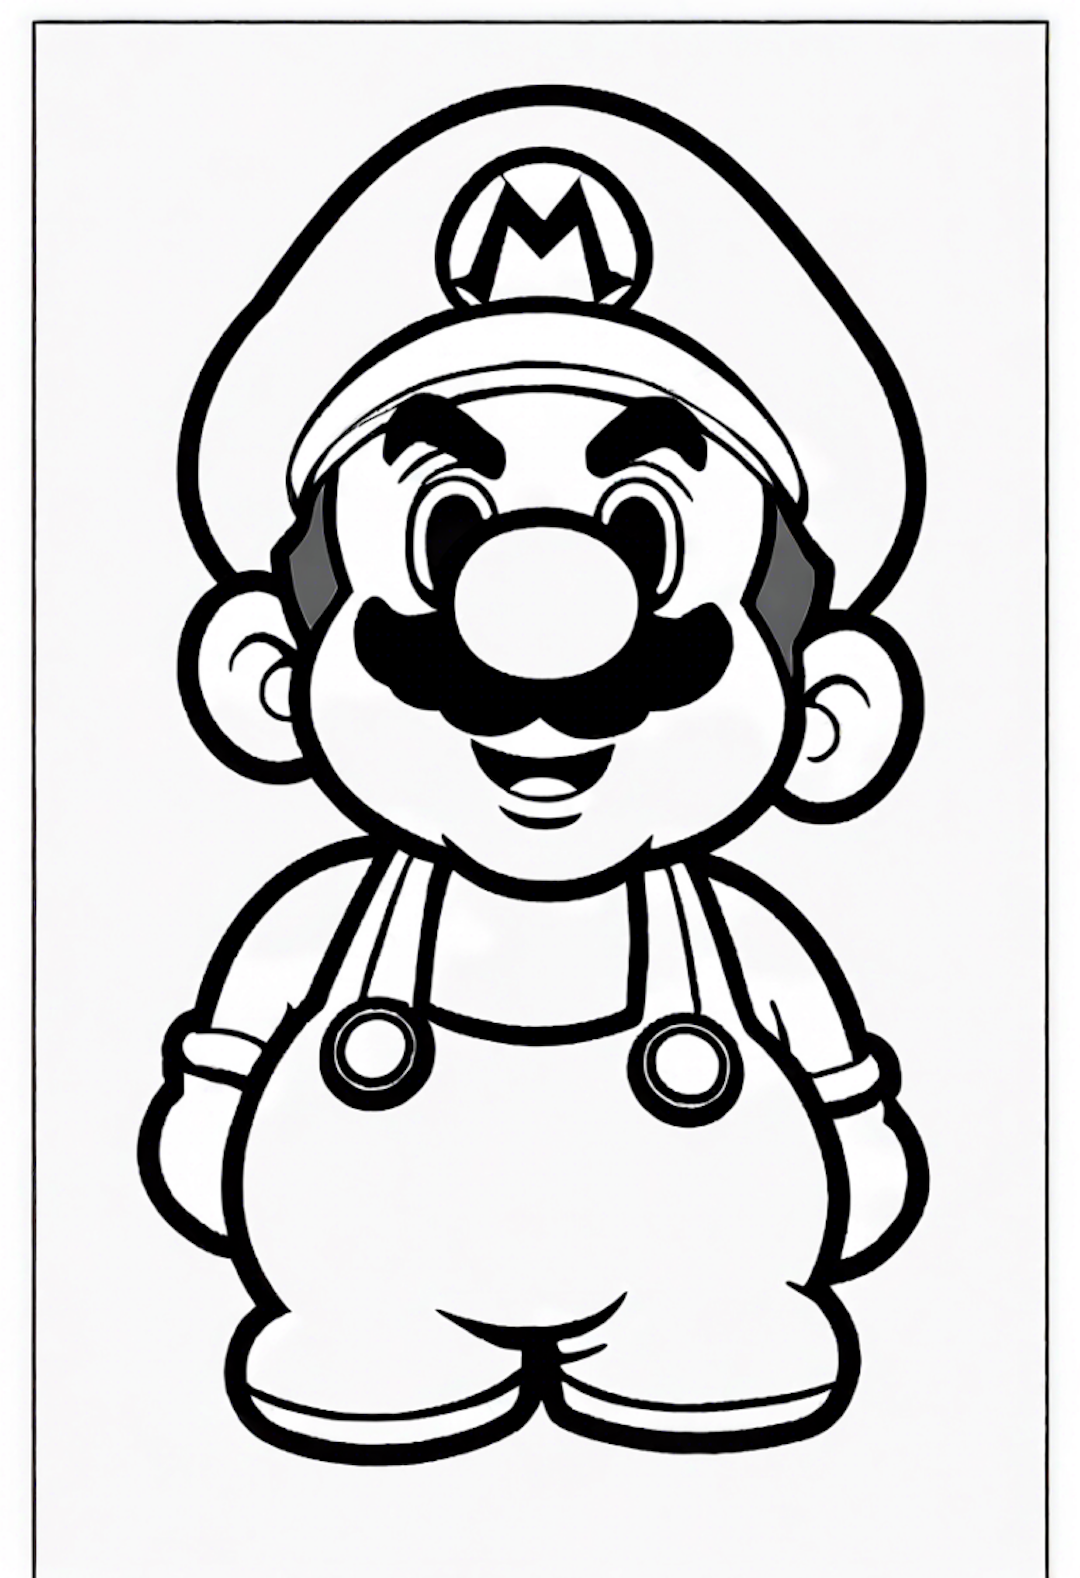 Mario the Plumber Coloring Fun coloring pages